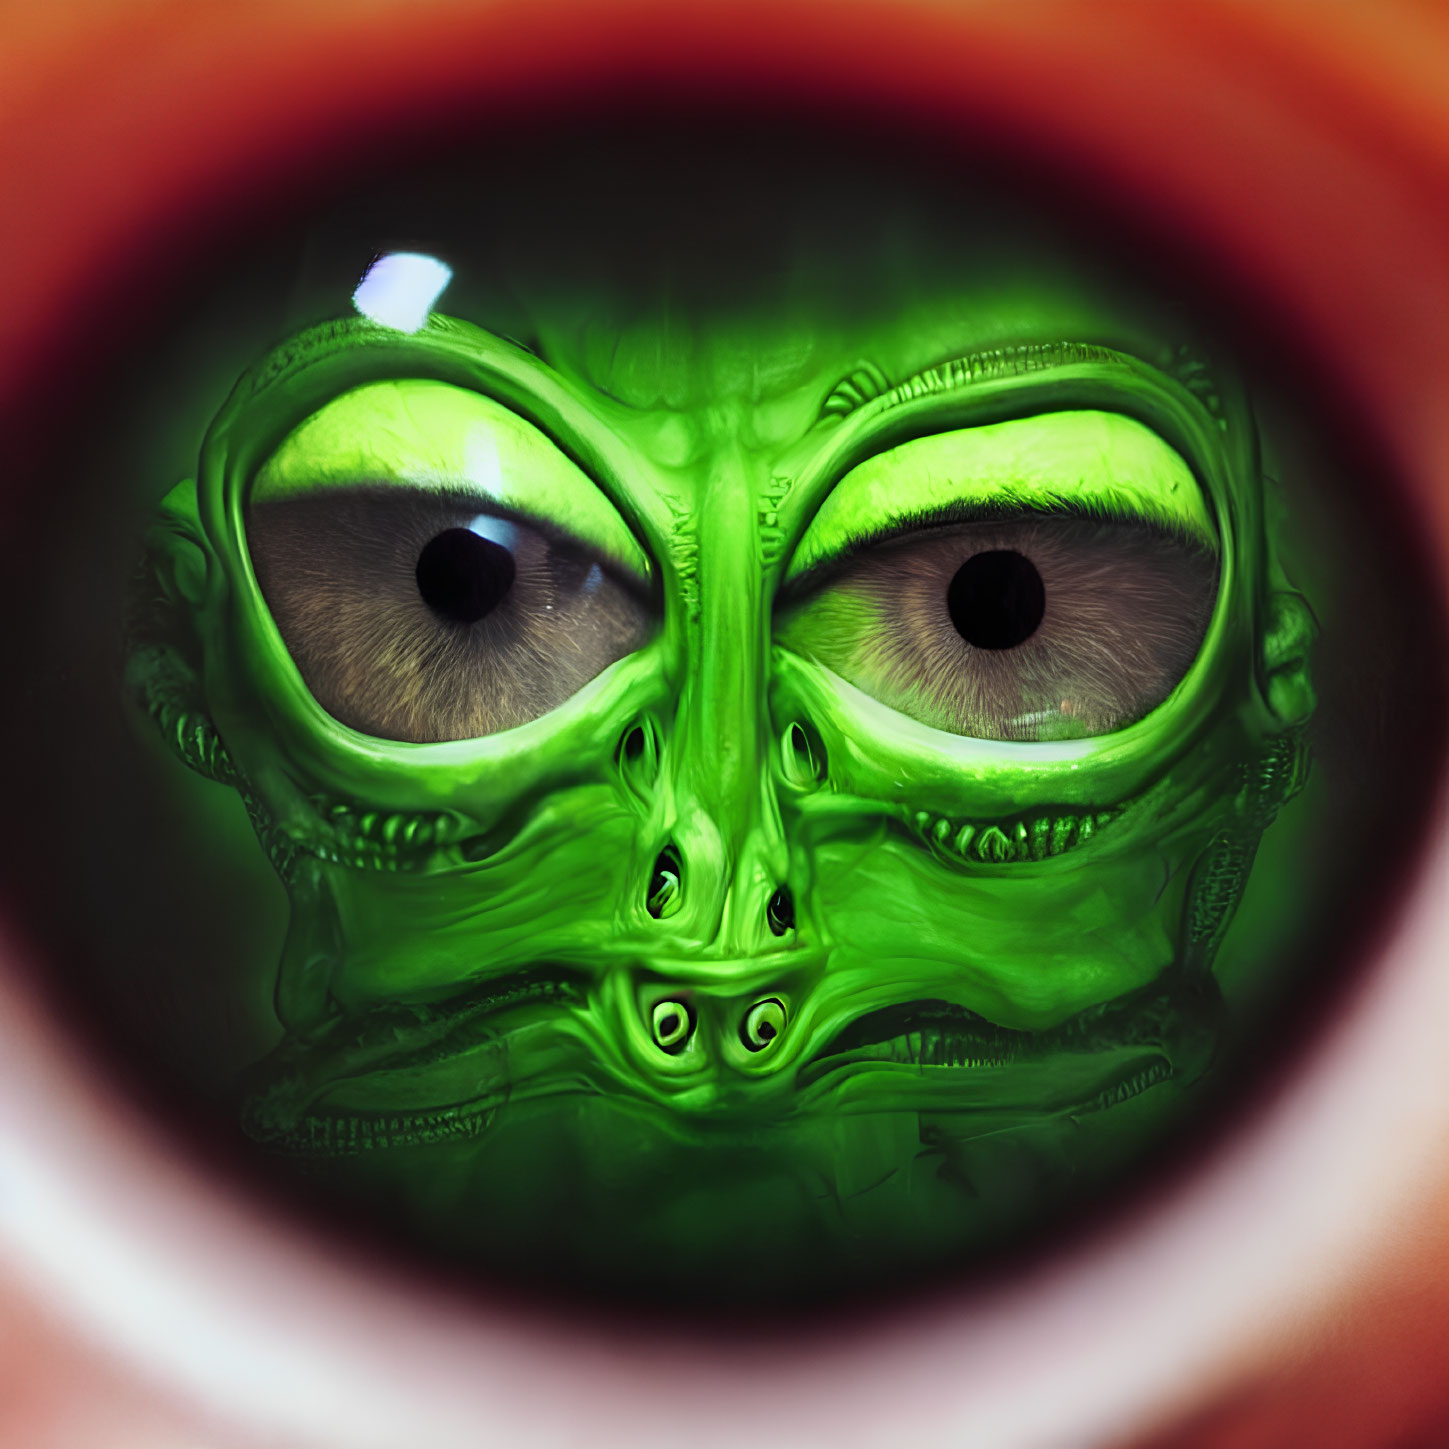 Detailed Close-Up of Green Alien Mask with Large Black Eyes in Circular Frame